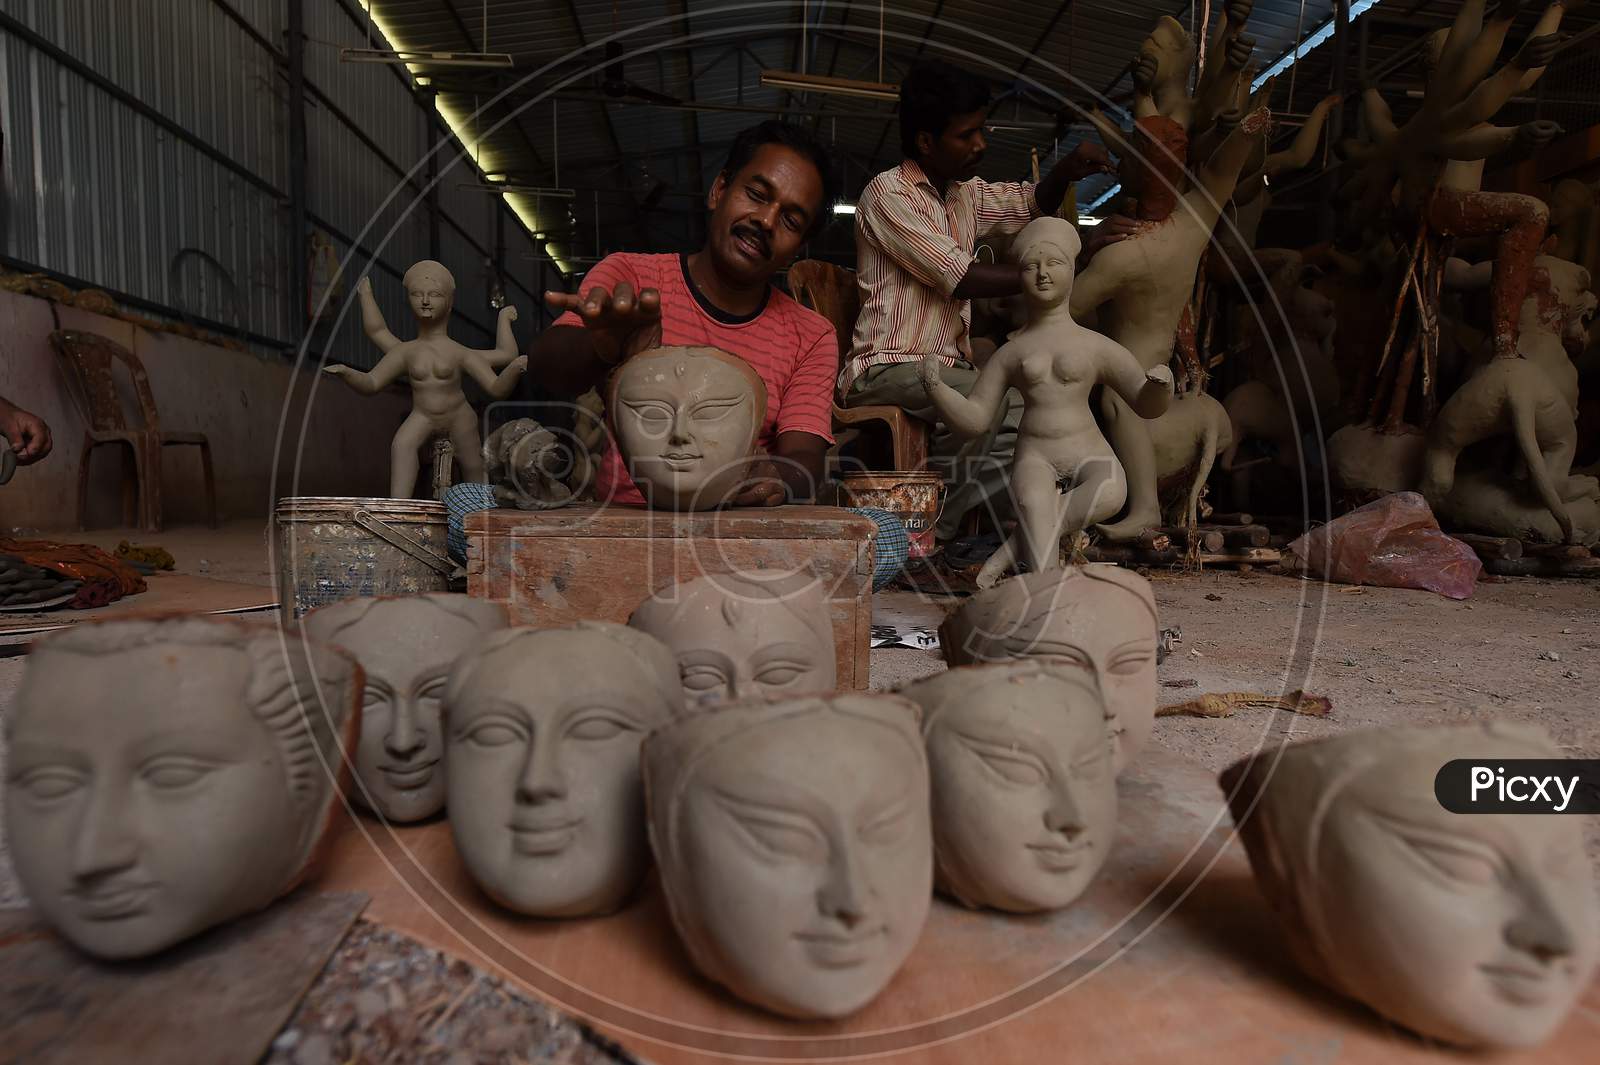 An Artisan Works On Clay Sculptures Depicting A Goddess Durga Ahead Of The Upcoming 'Durga Puja' Festival In Chennai On October 15, 2020.